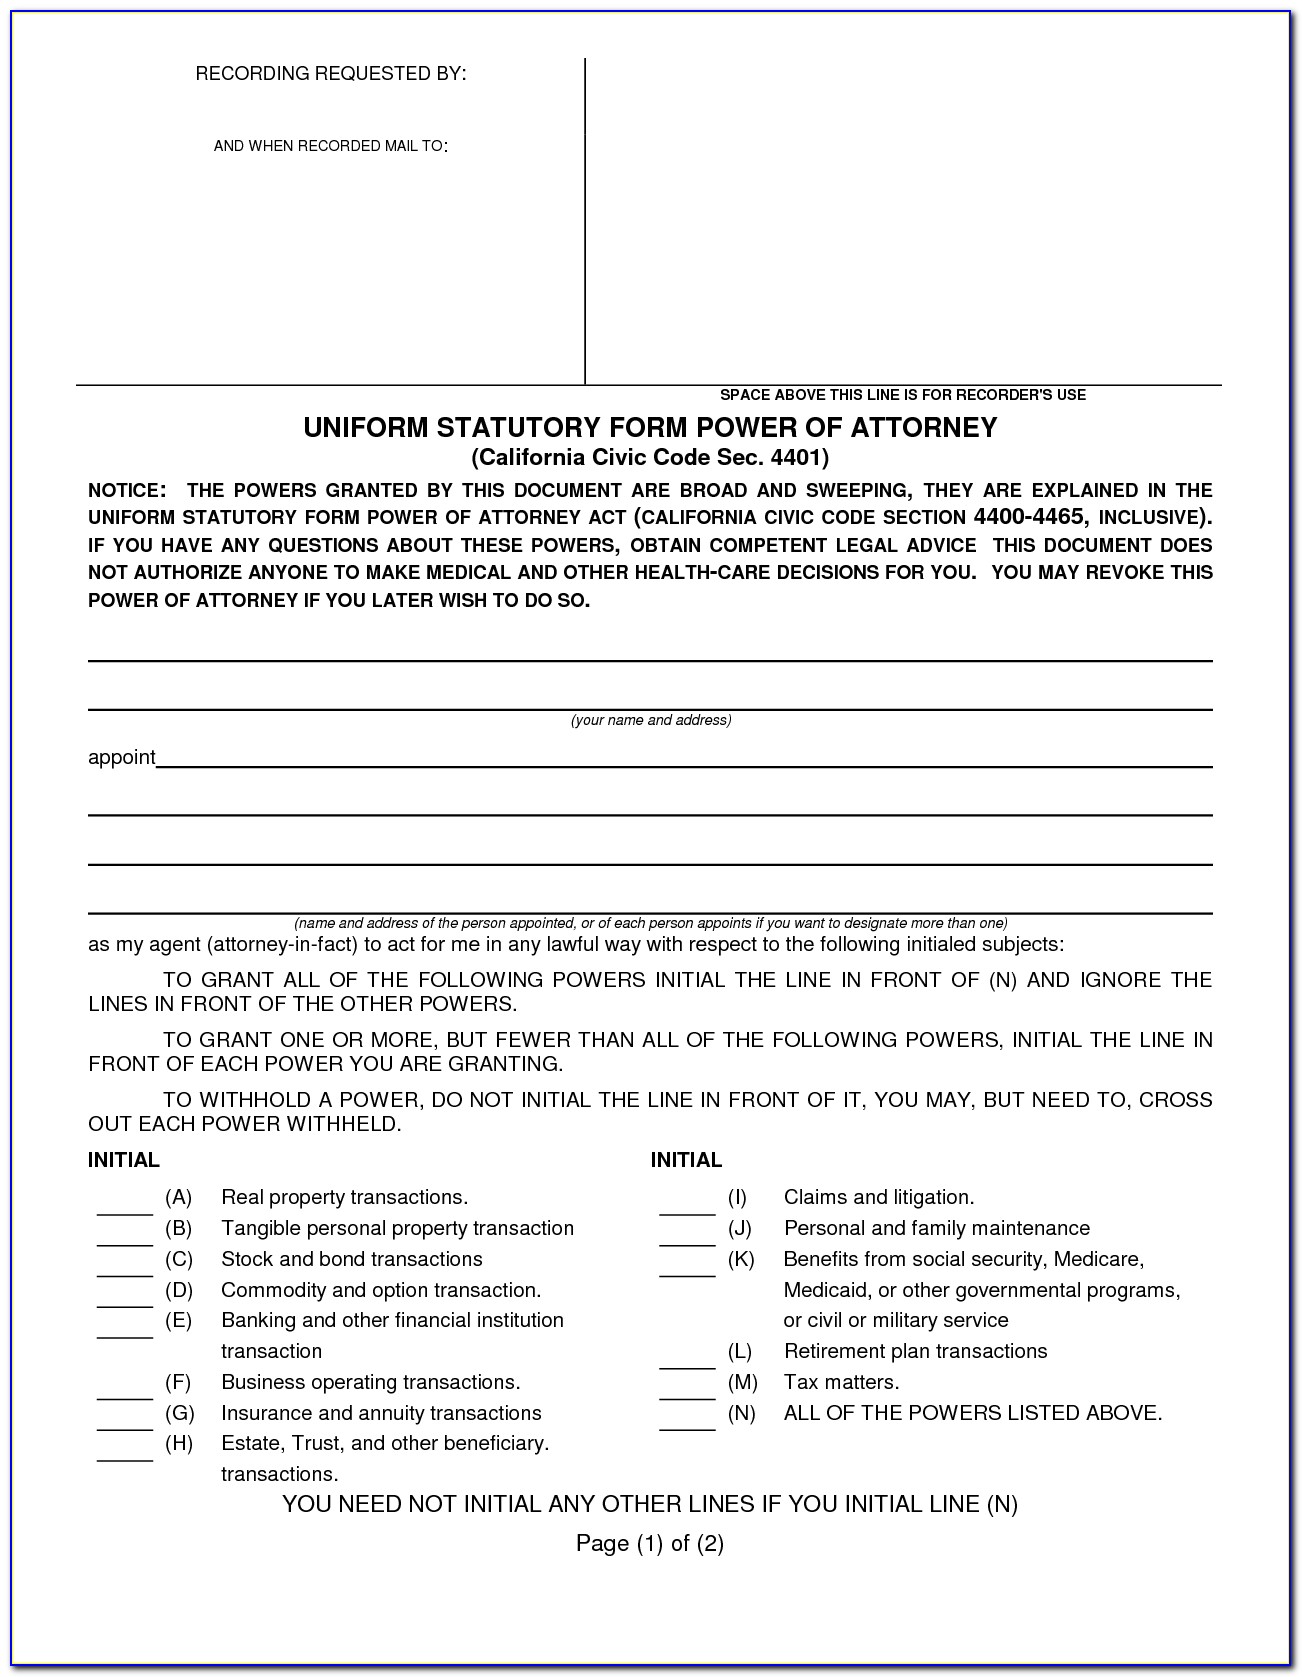 California Medical Association Durable Power Of Attorney For Health Care Decisions Form